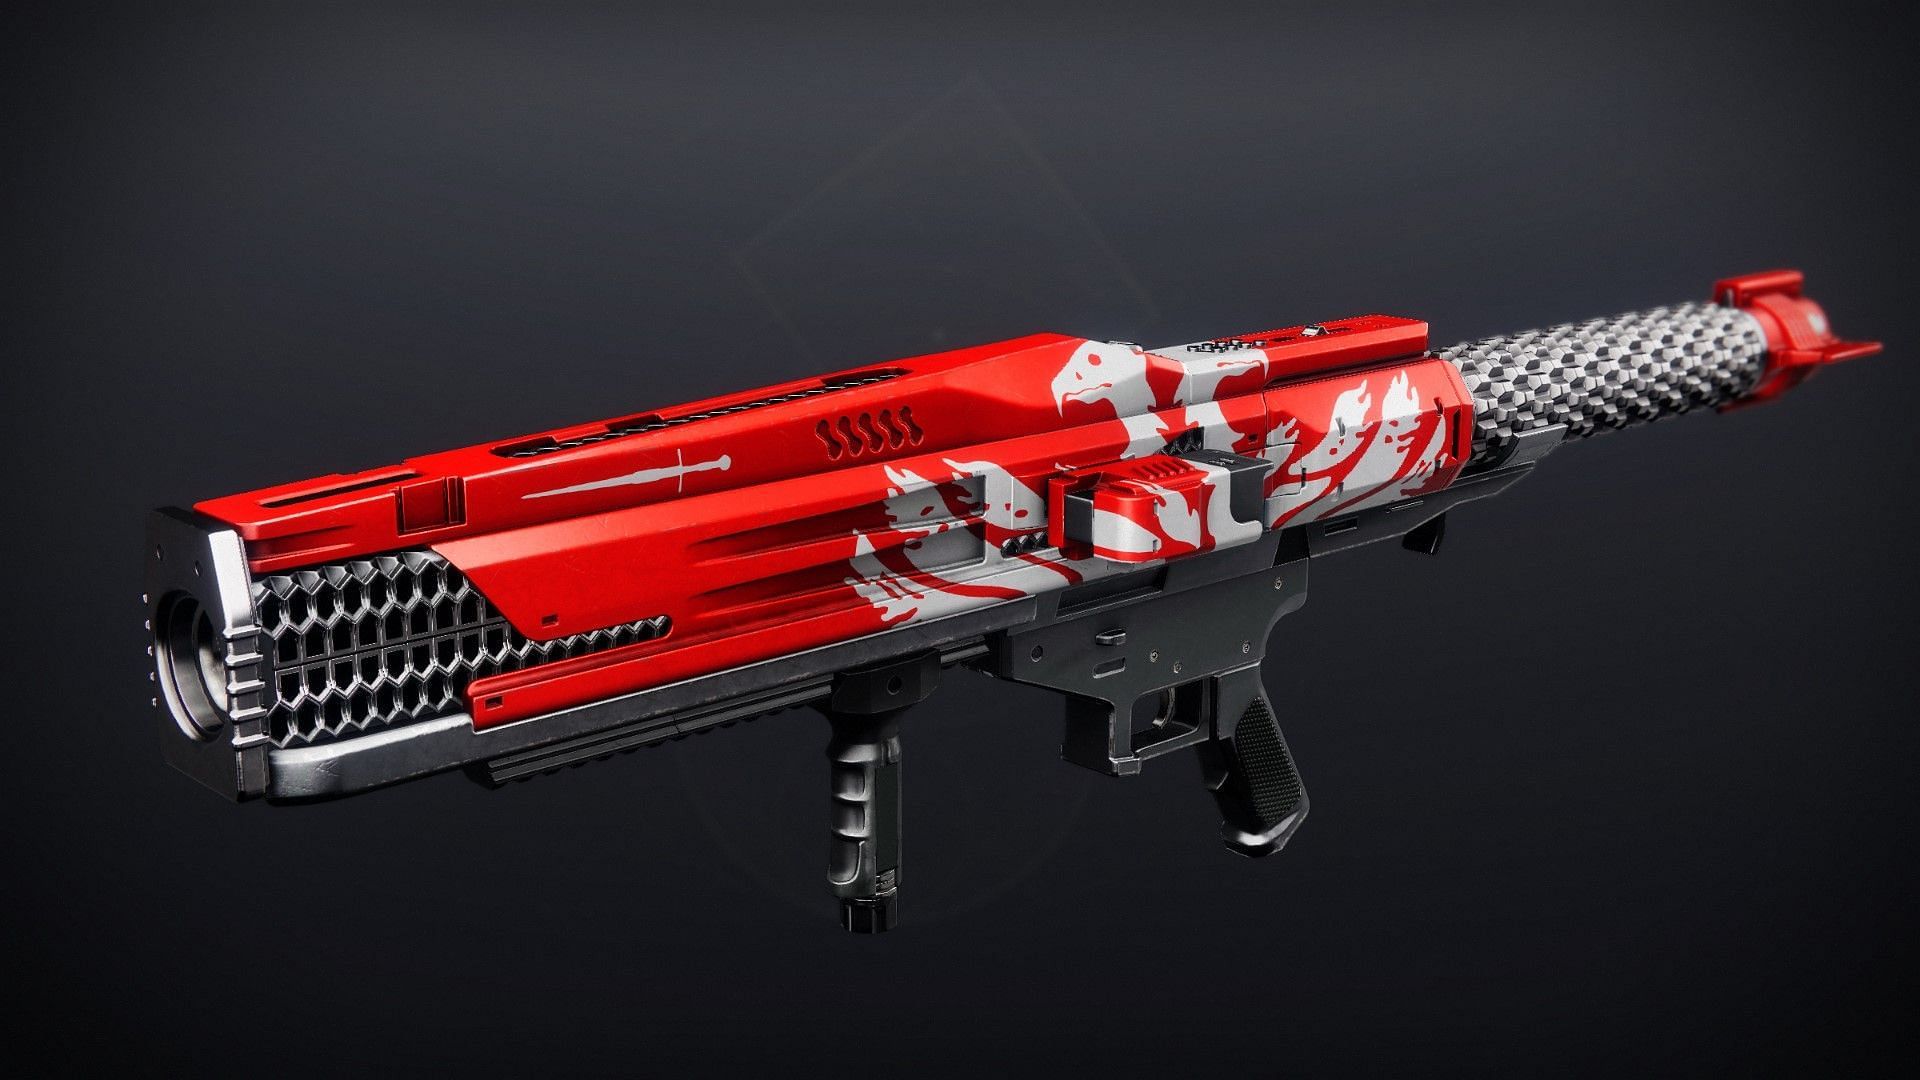 Crucible ornaments for the Ascendancy Rocket Launcher in Destiny 2 (Image v...